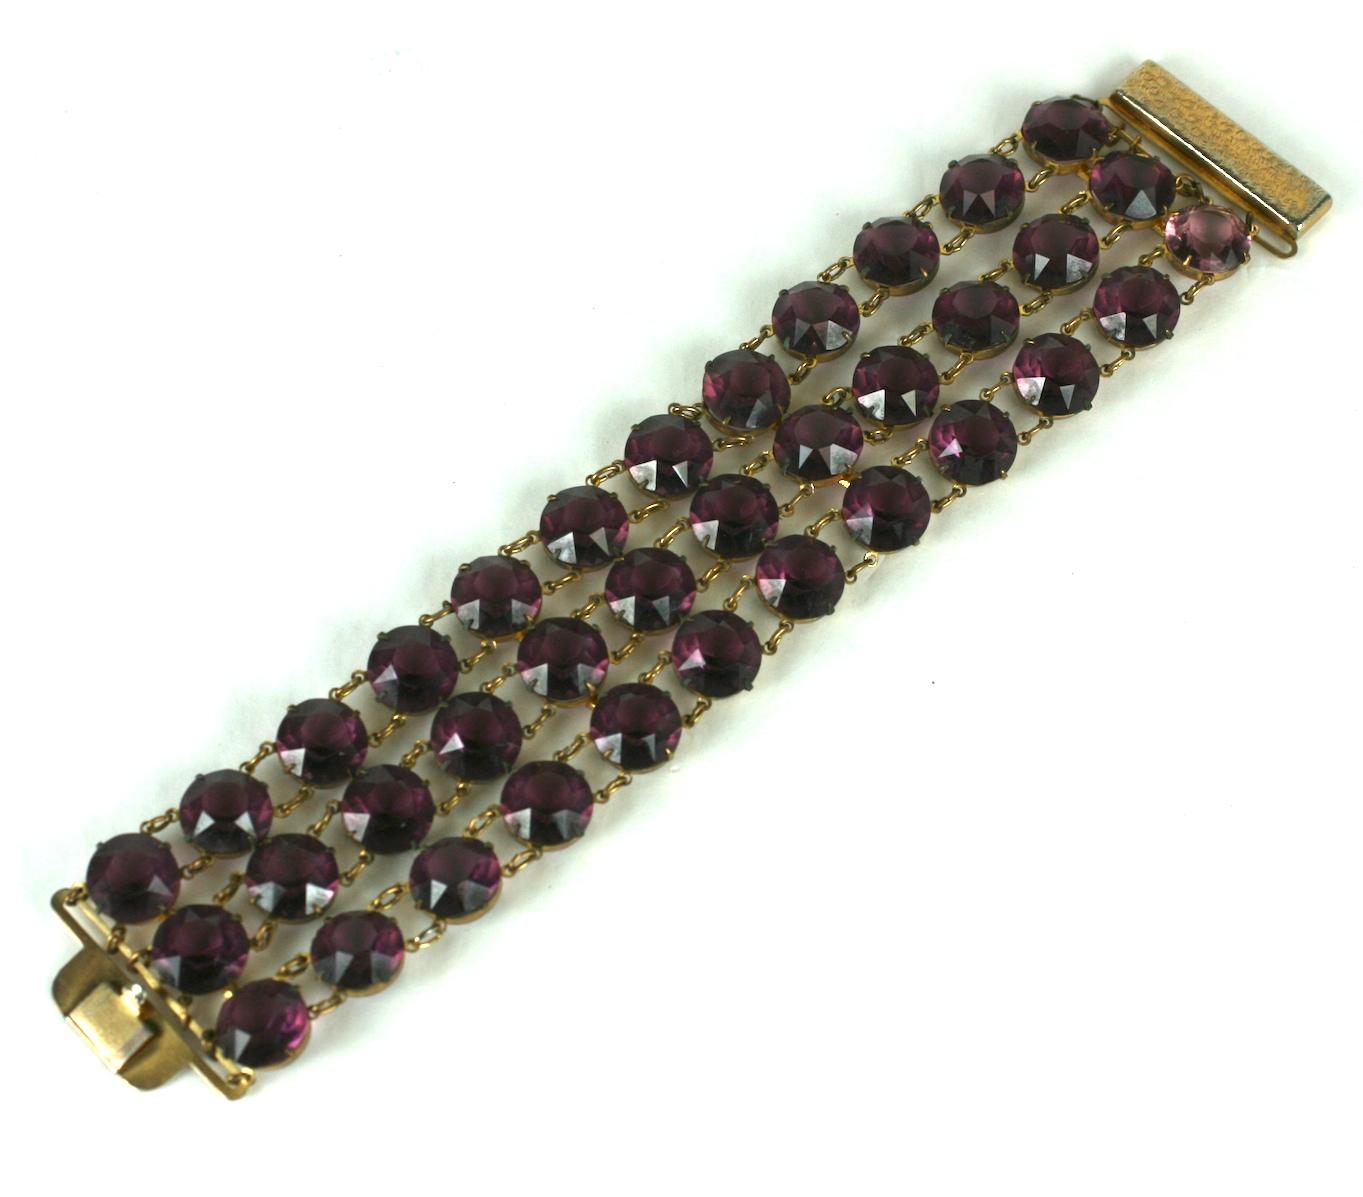 Amythest Crystal Link Bracelet from the 1950's. Made in the Deco style with a gilt clasp. 3 large rows of crystals are linked and form a wide flexible bracelet. 1950's USA. 
7.25